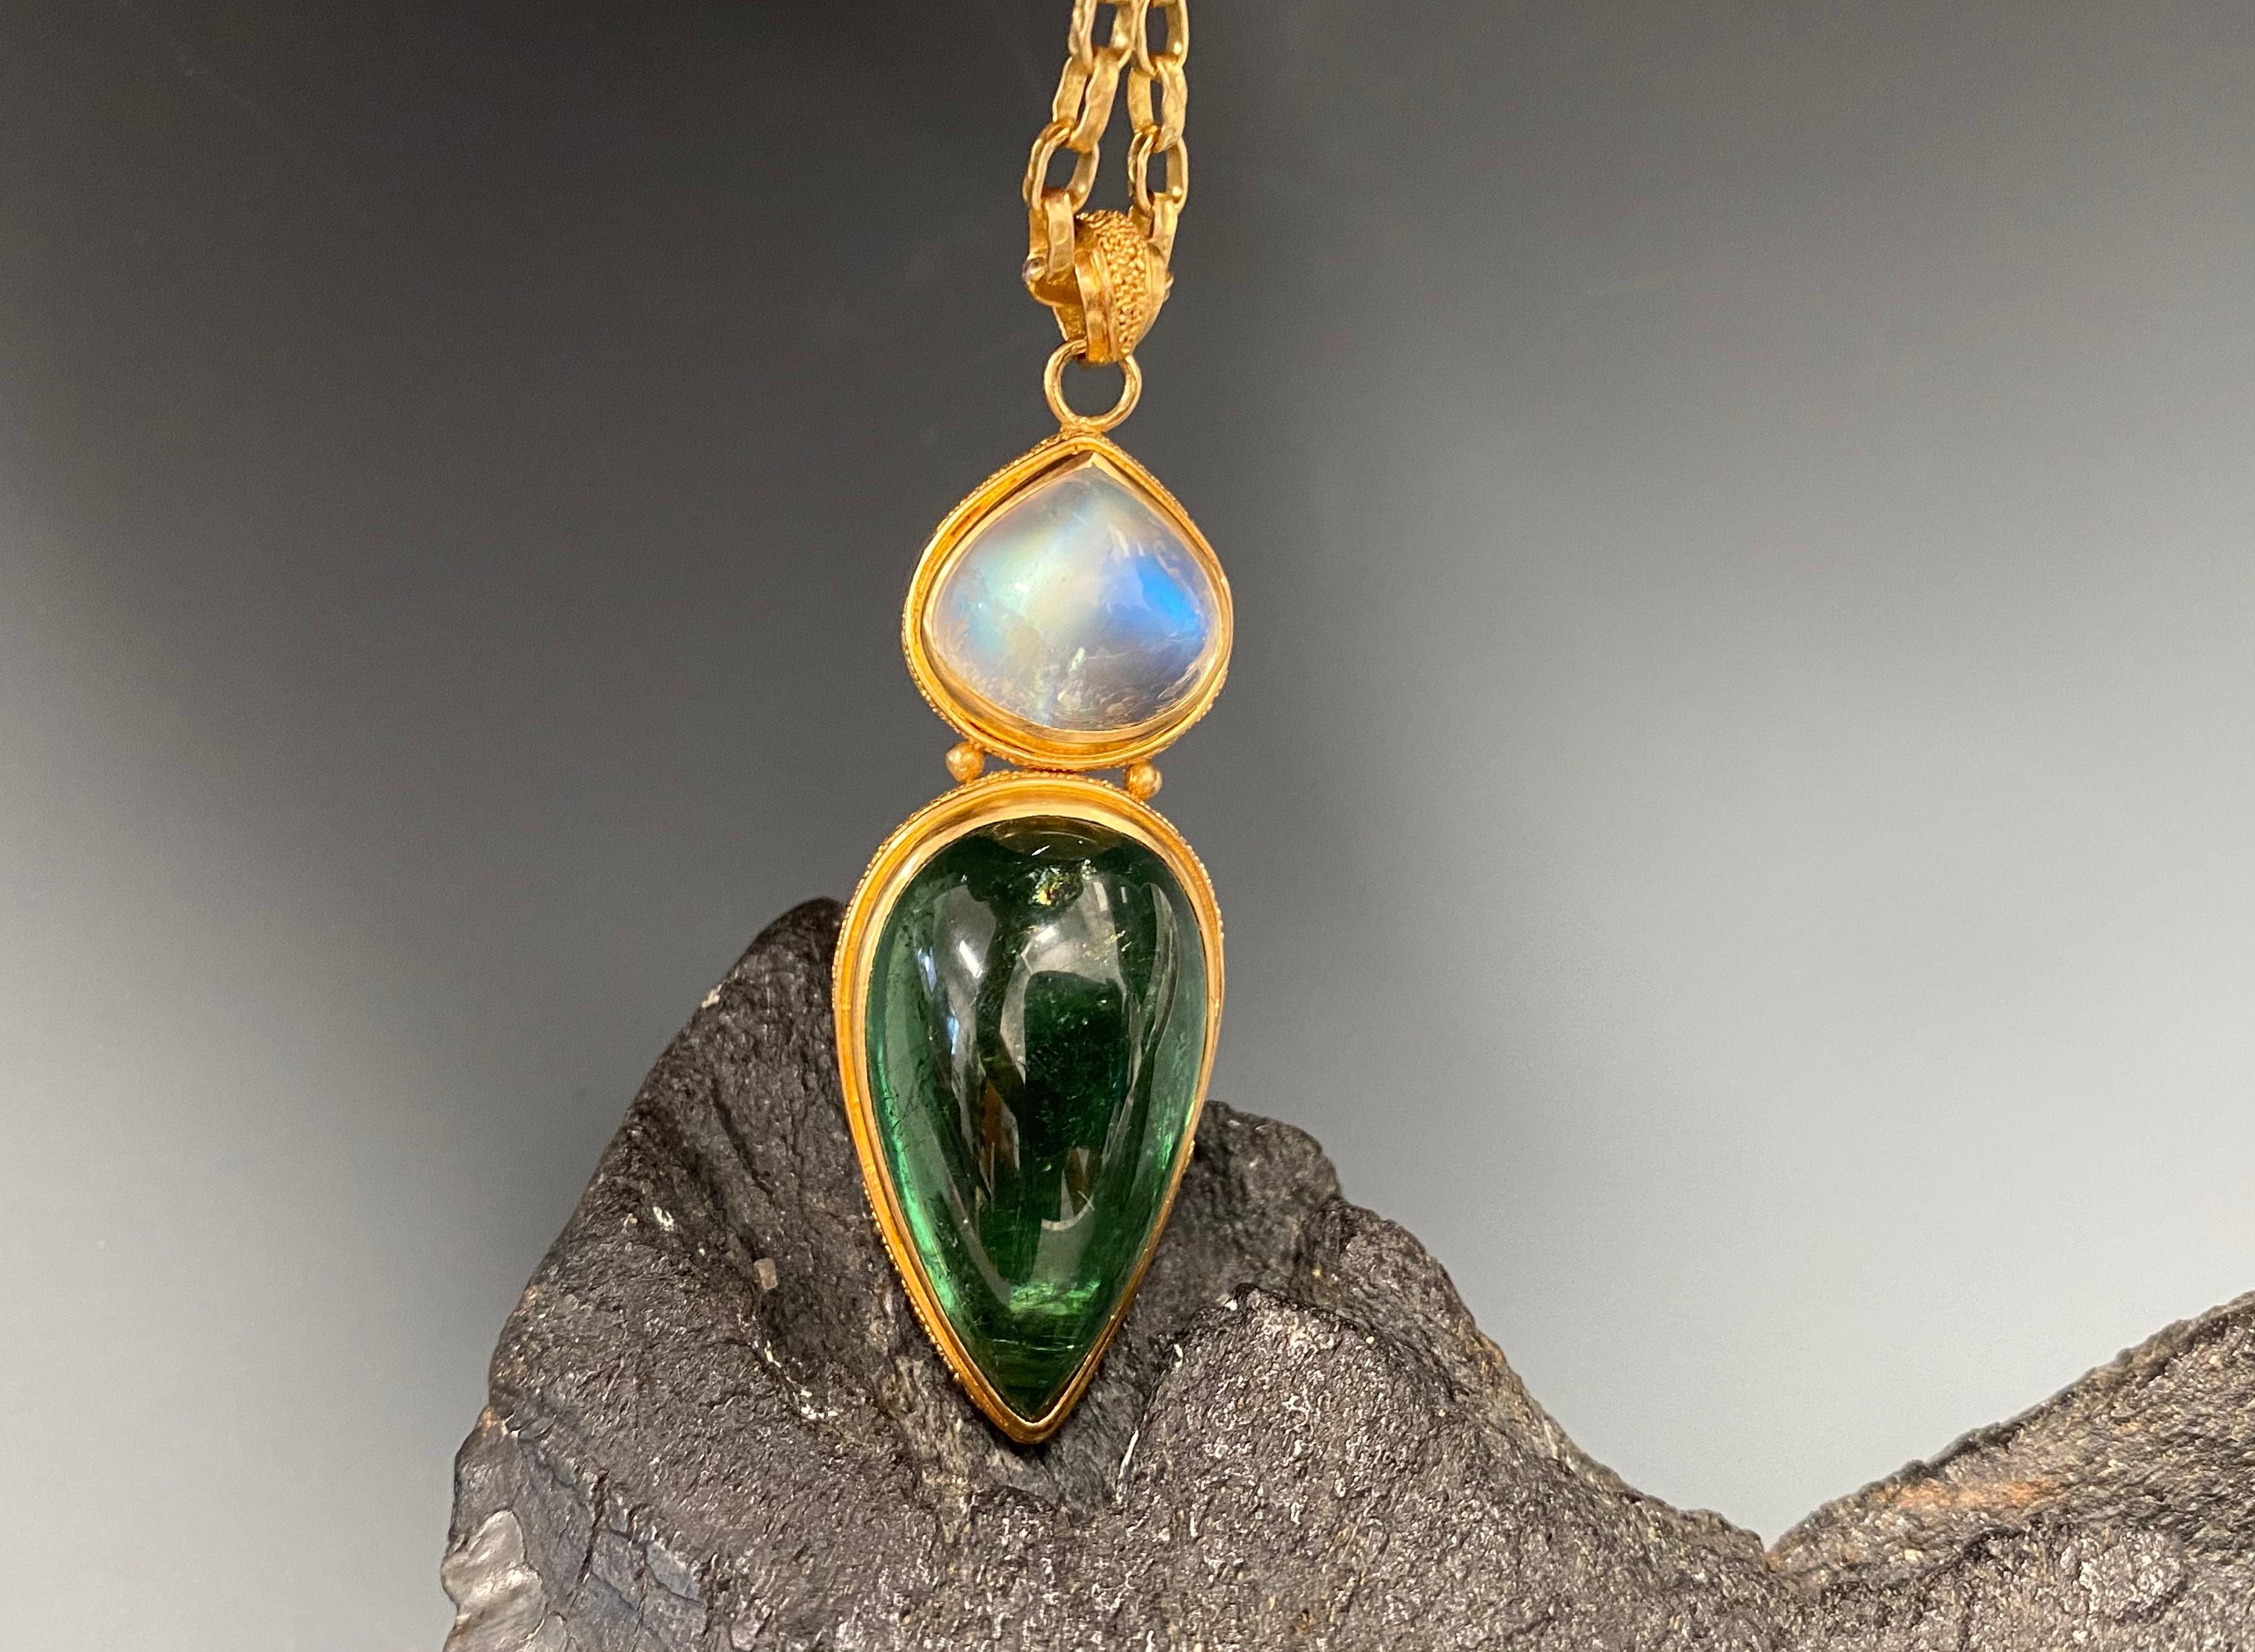 Two opposing complementary colored pear cabochon stones are ornamented with delicate 